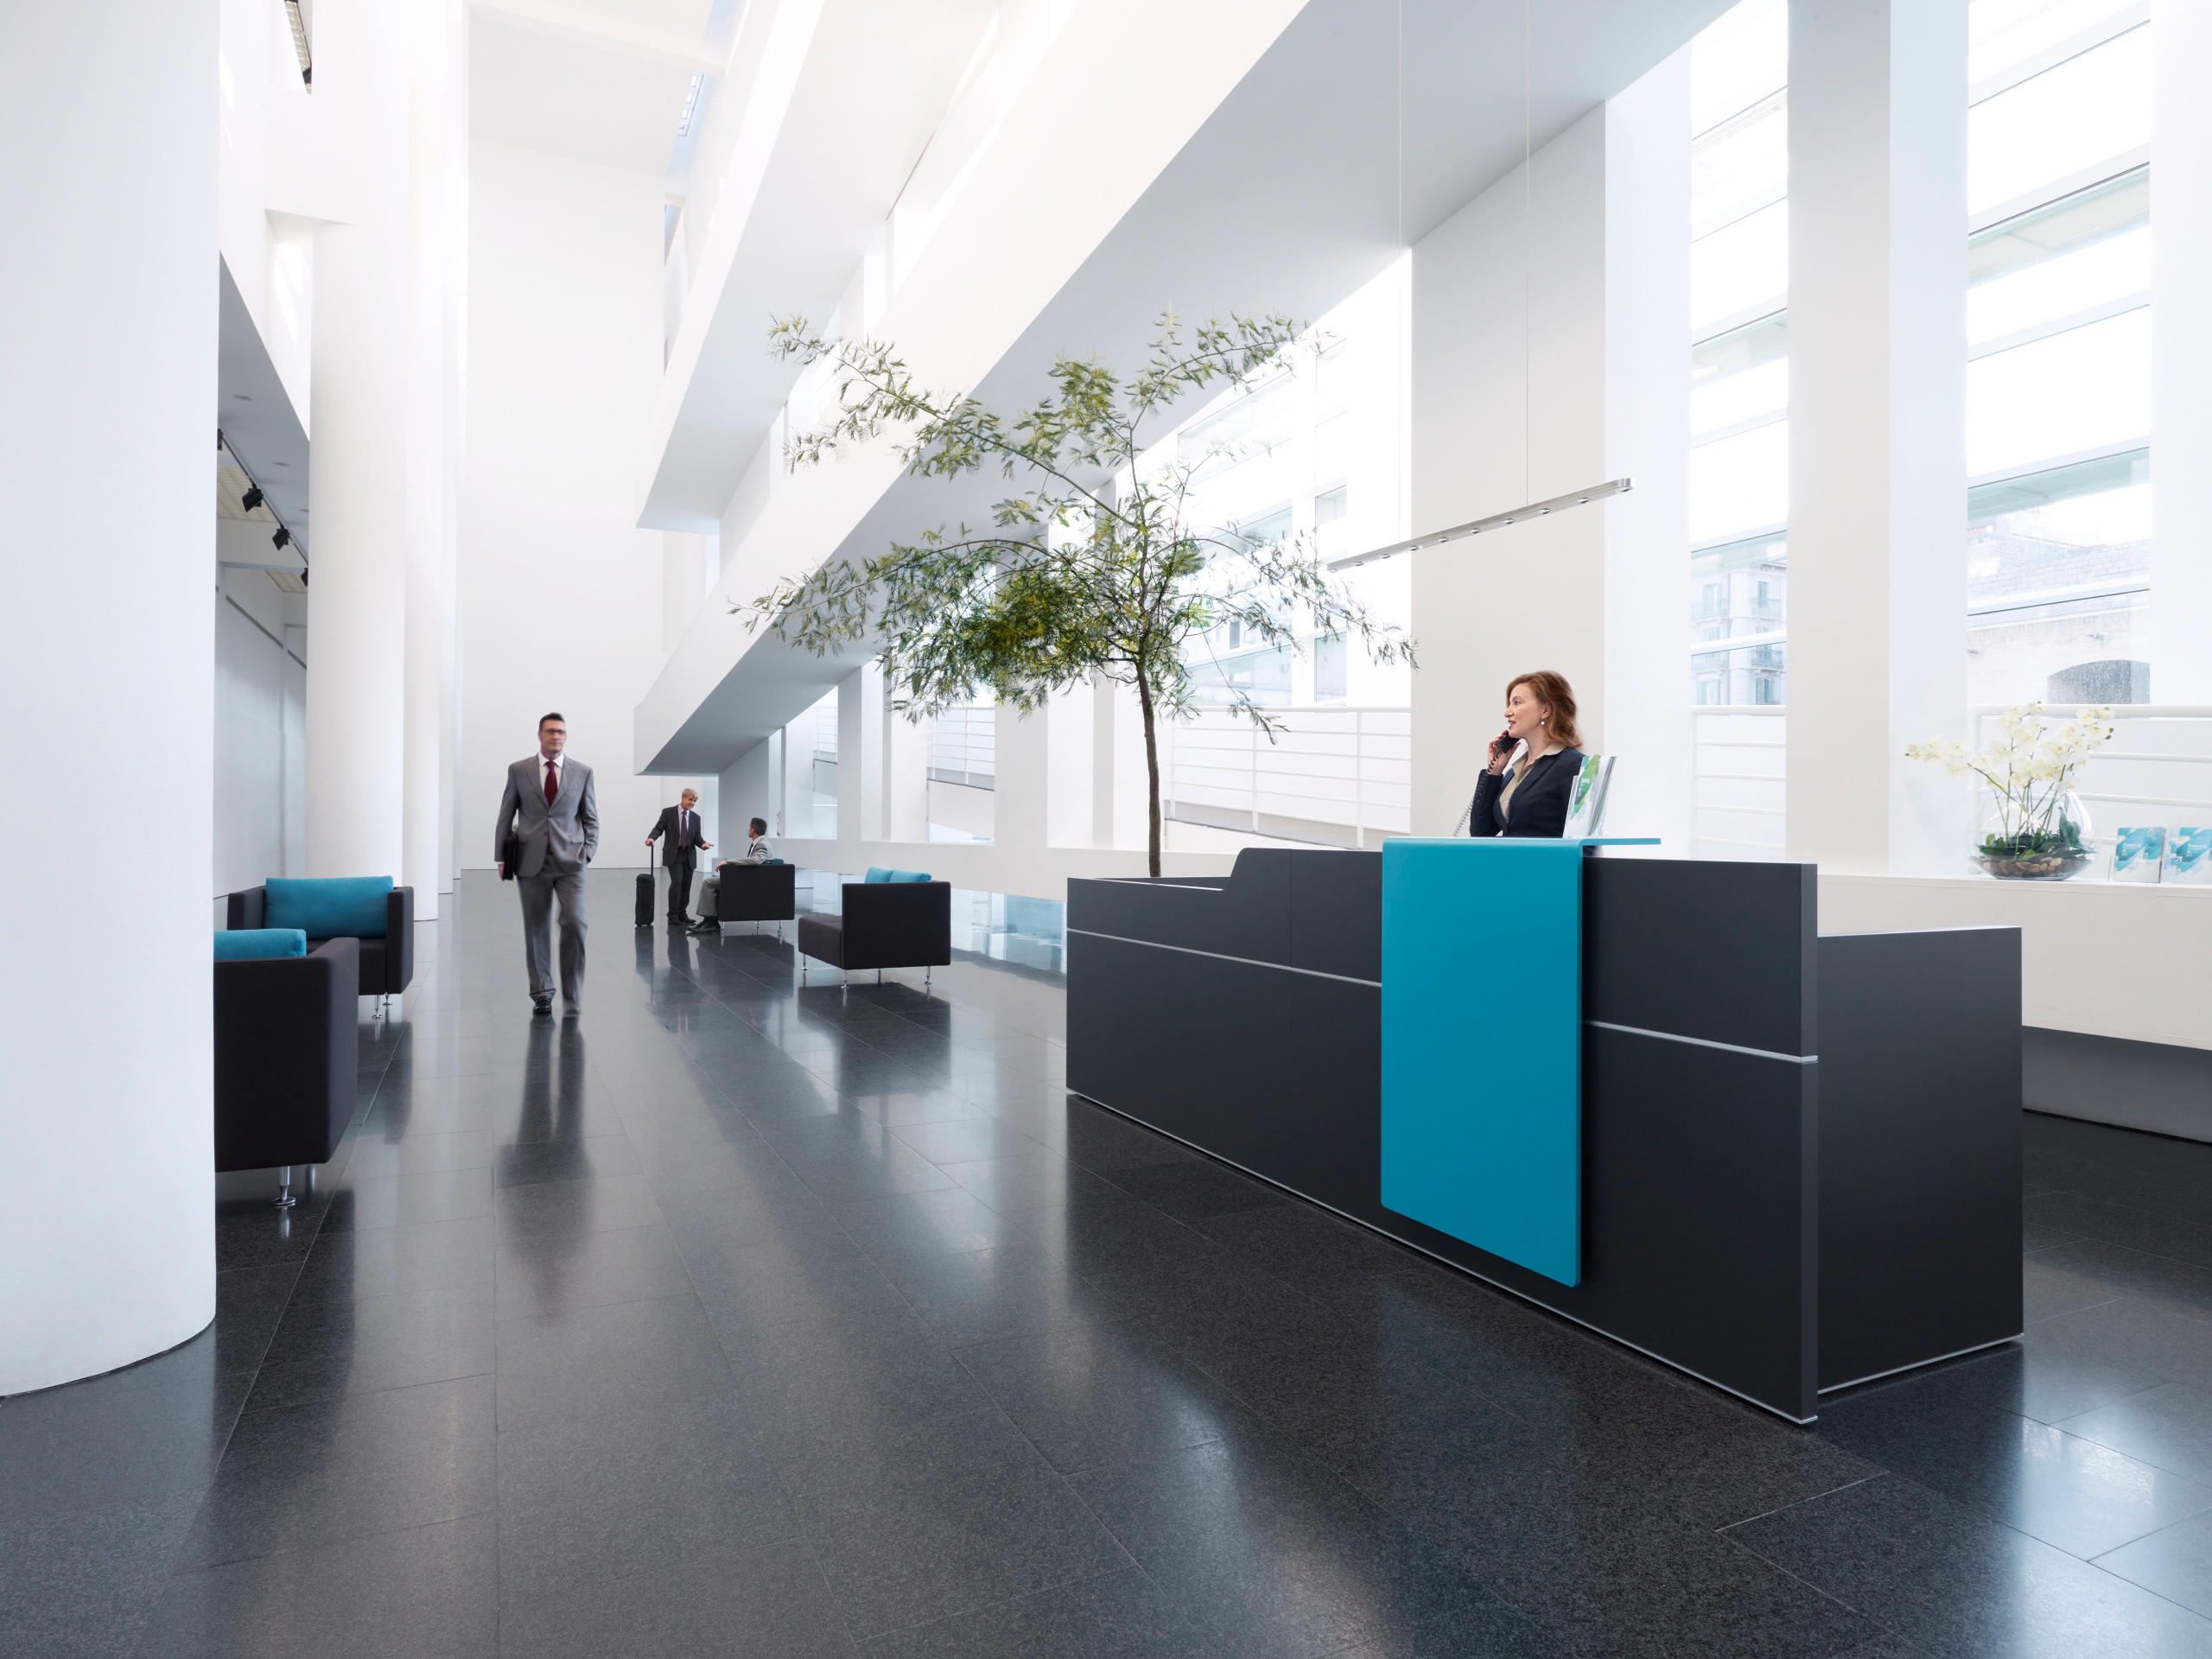 Reception Desk High Quality Designer Products Architonic